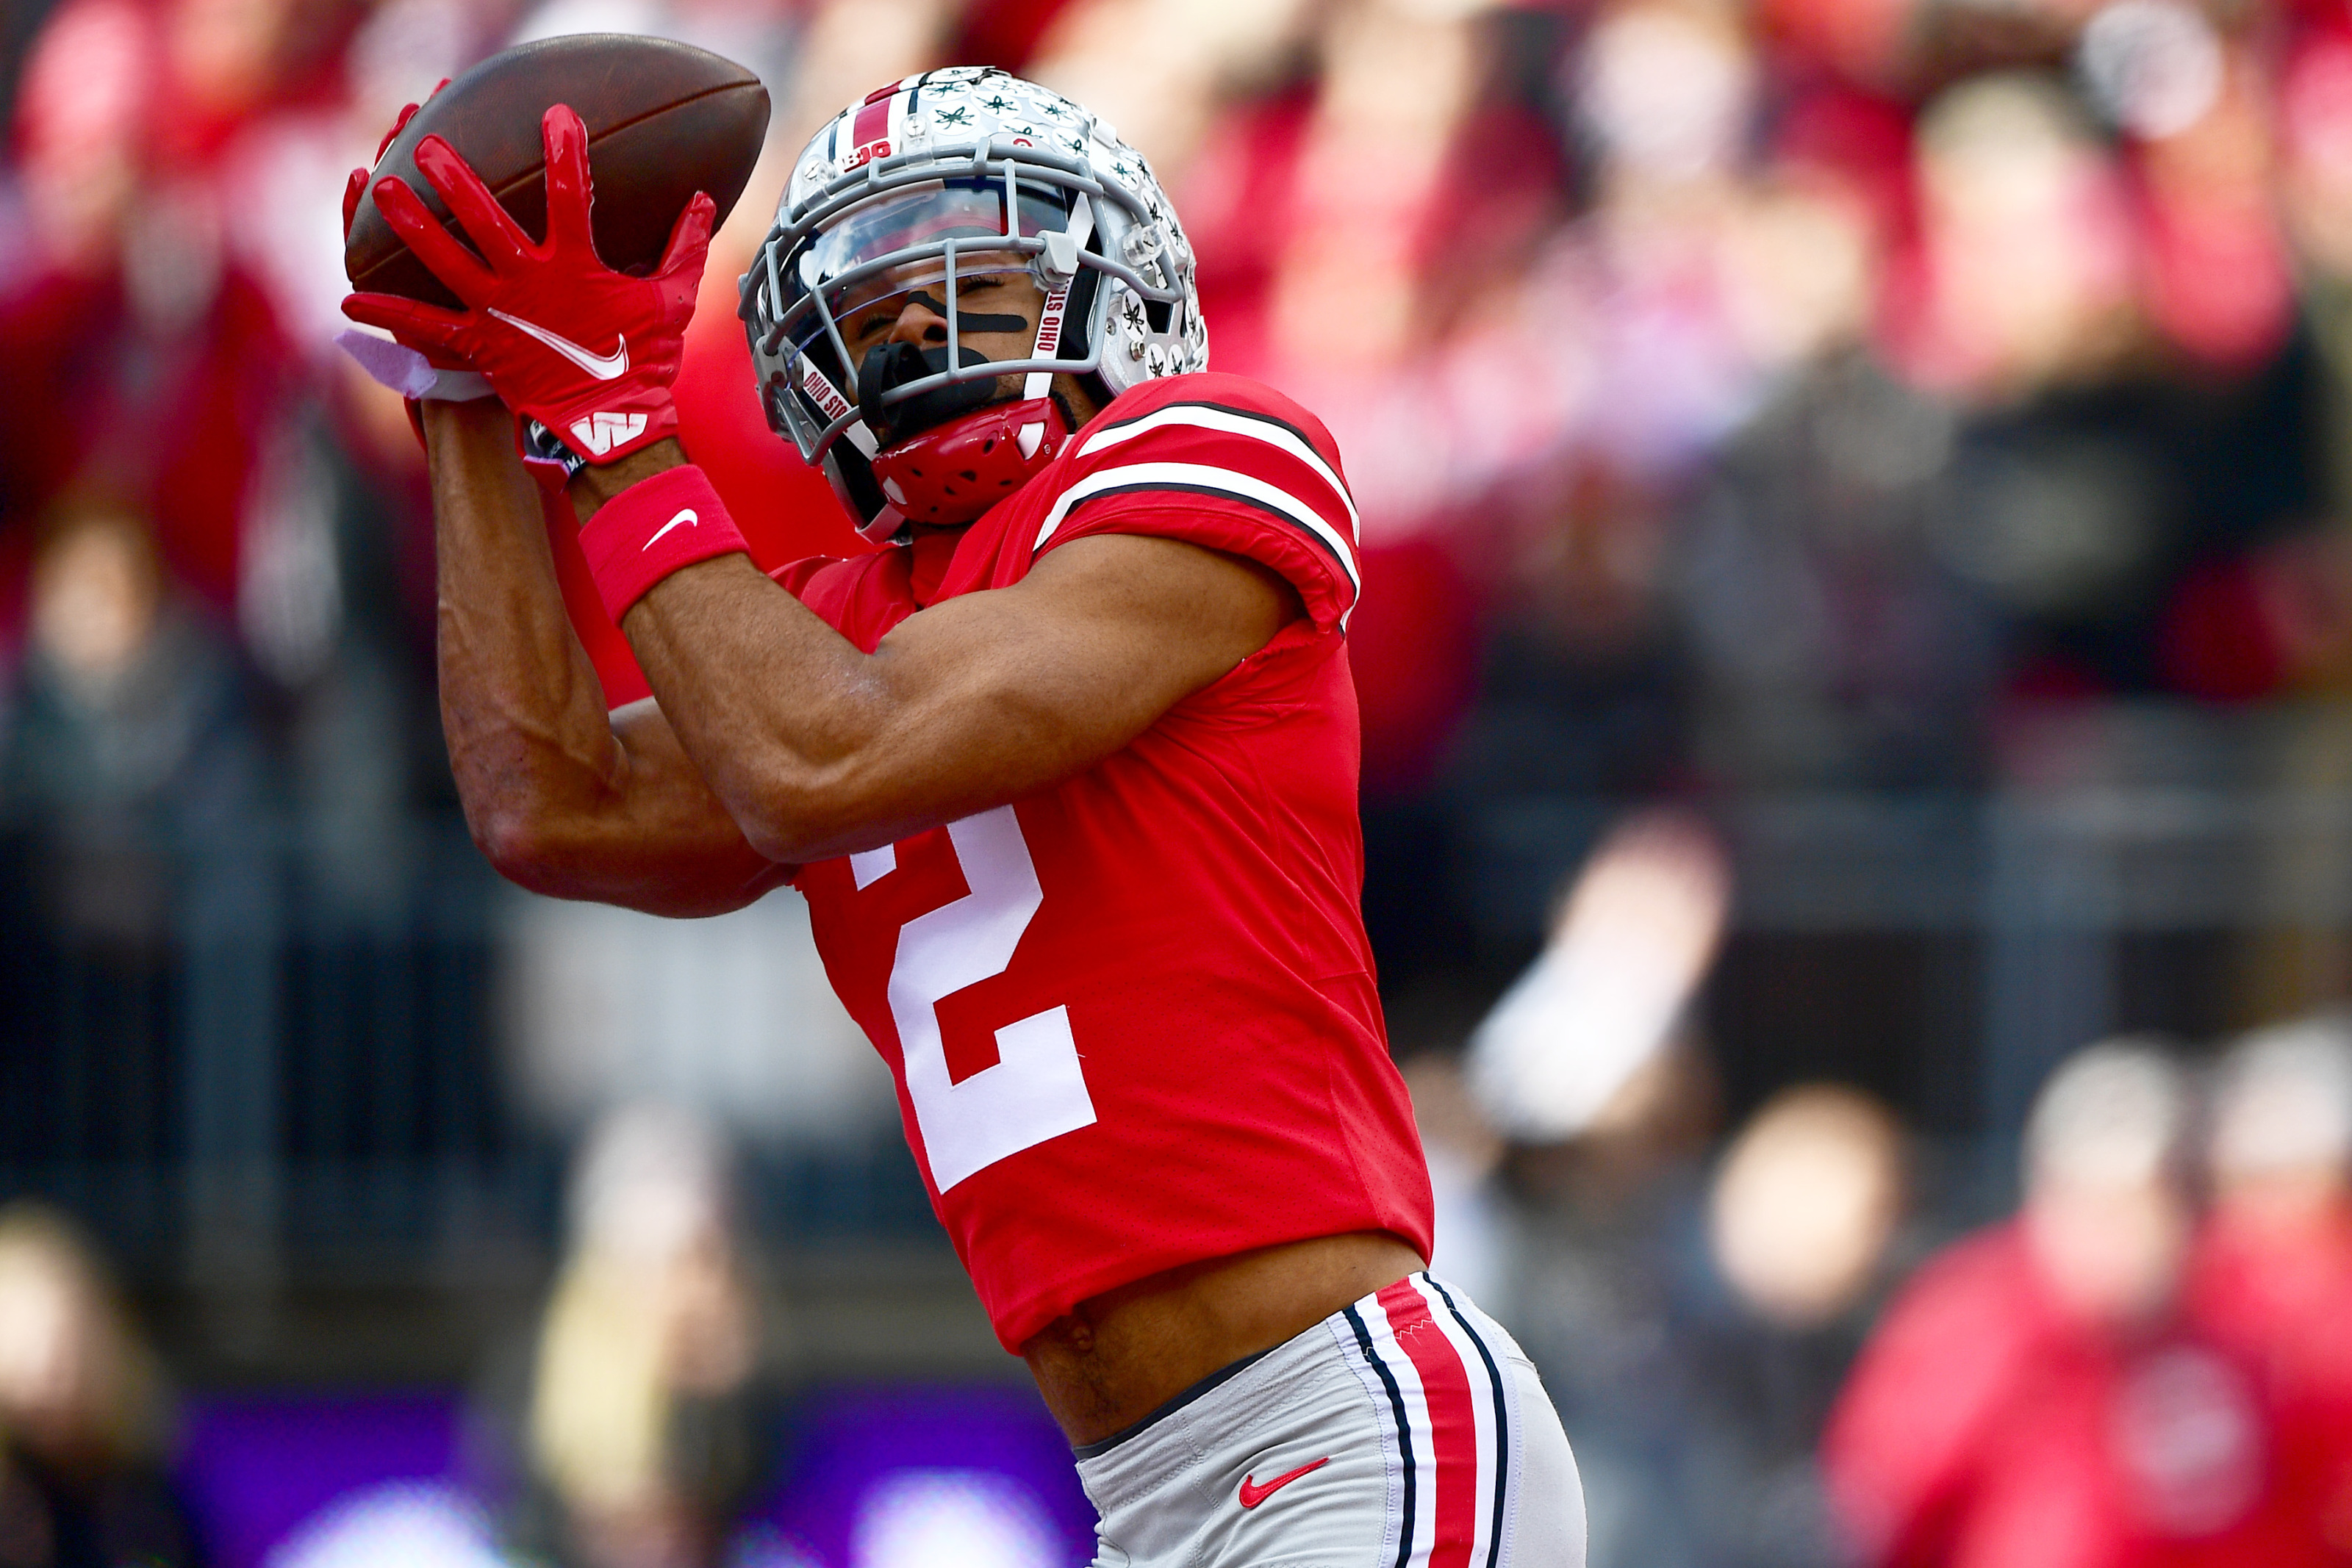 Chris Olave, Wide Receiver, Ohio State: 2022 NFL Draft Scouting Report